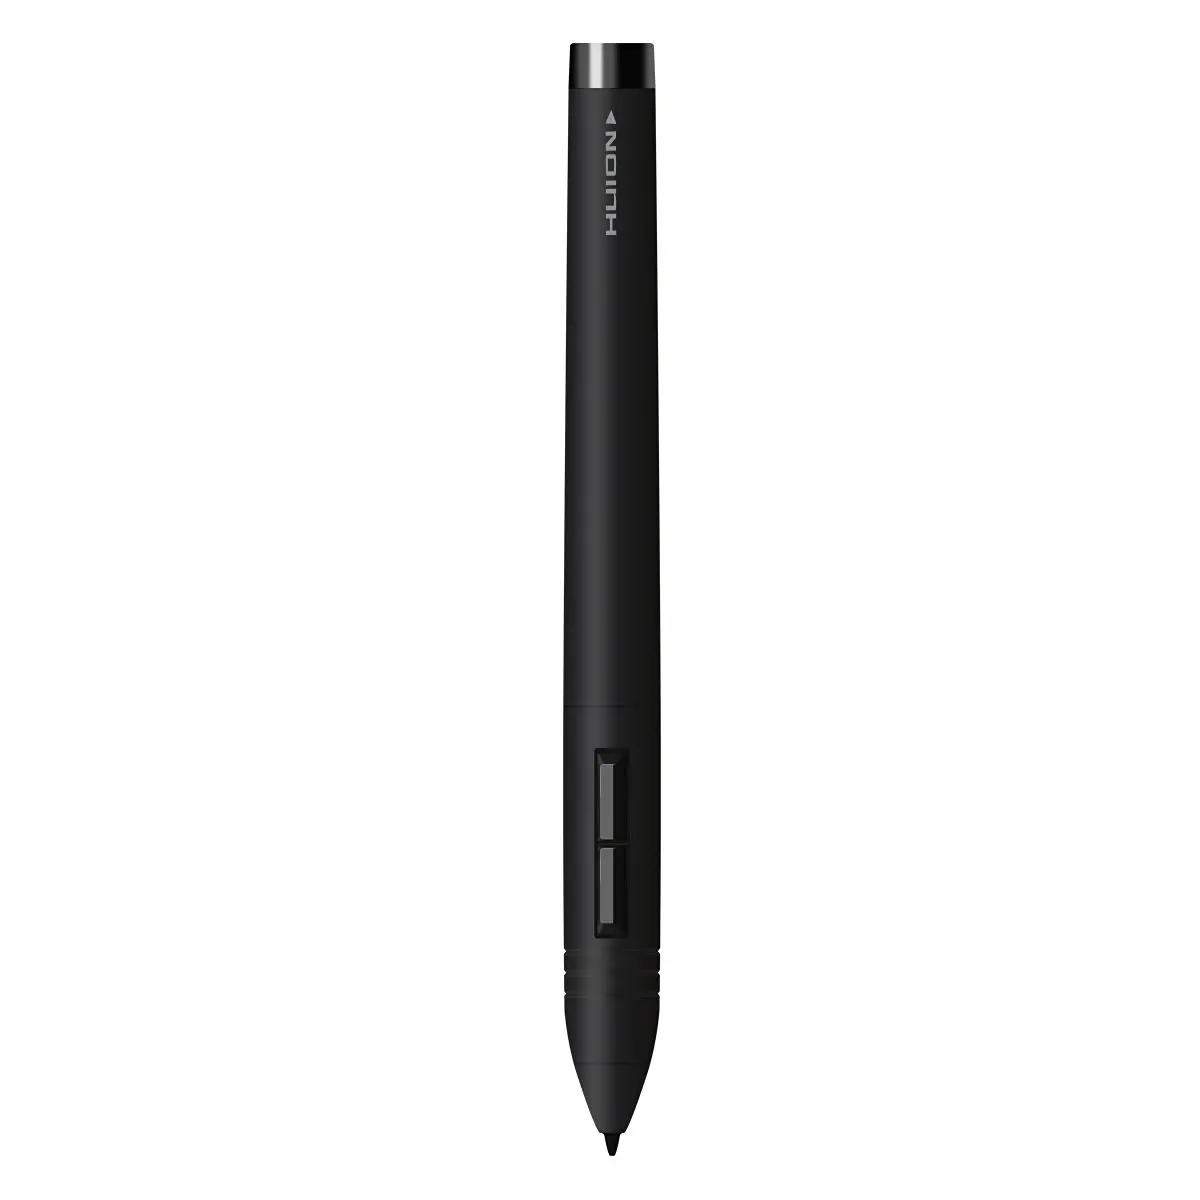 getting a new pen for huion gt 190